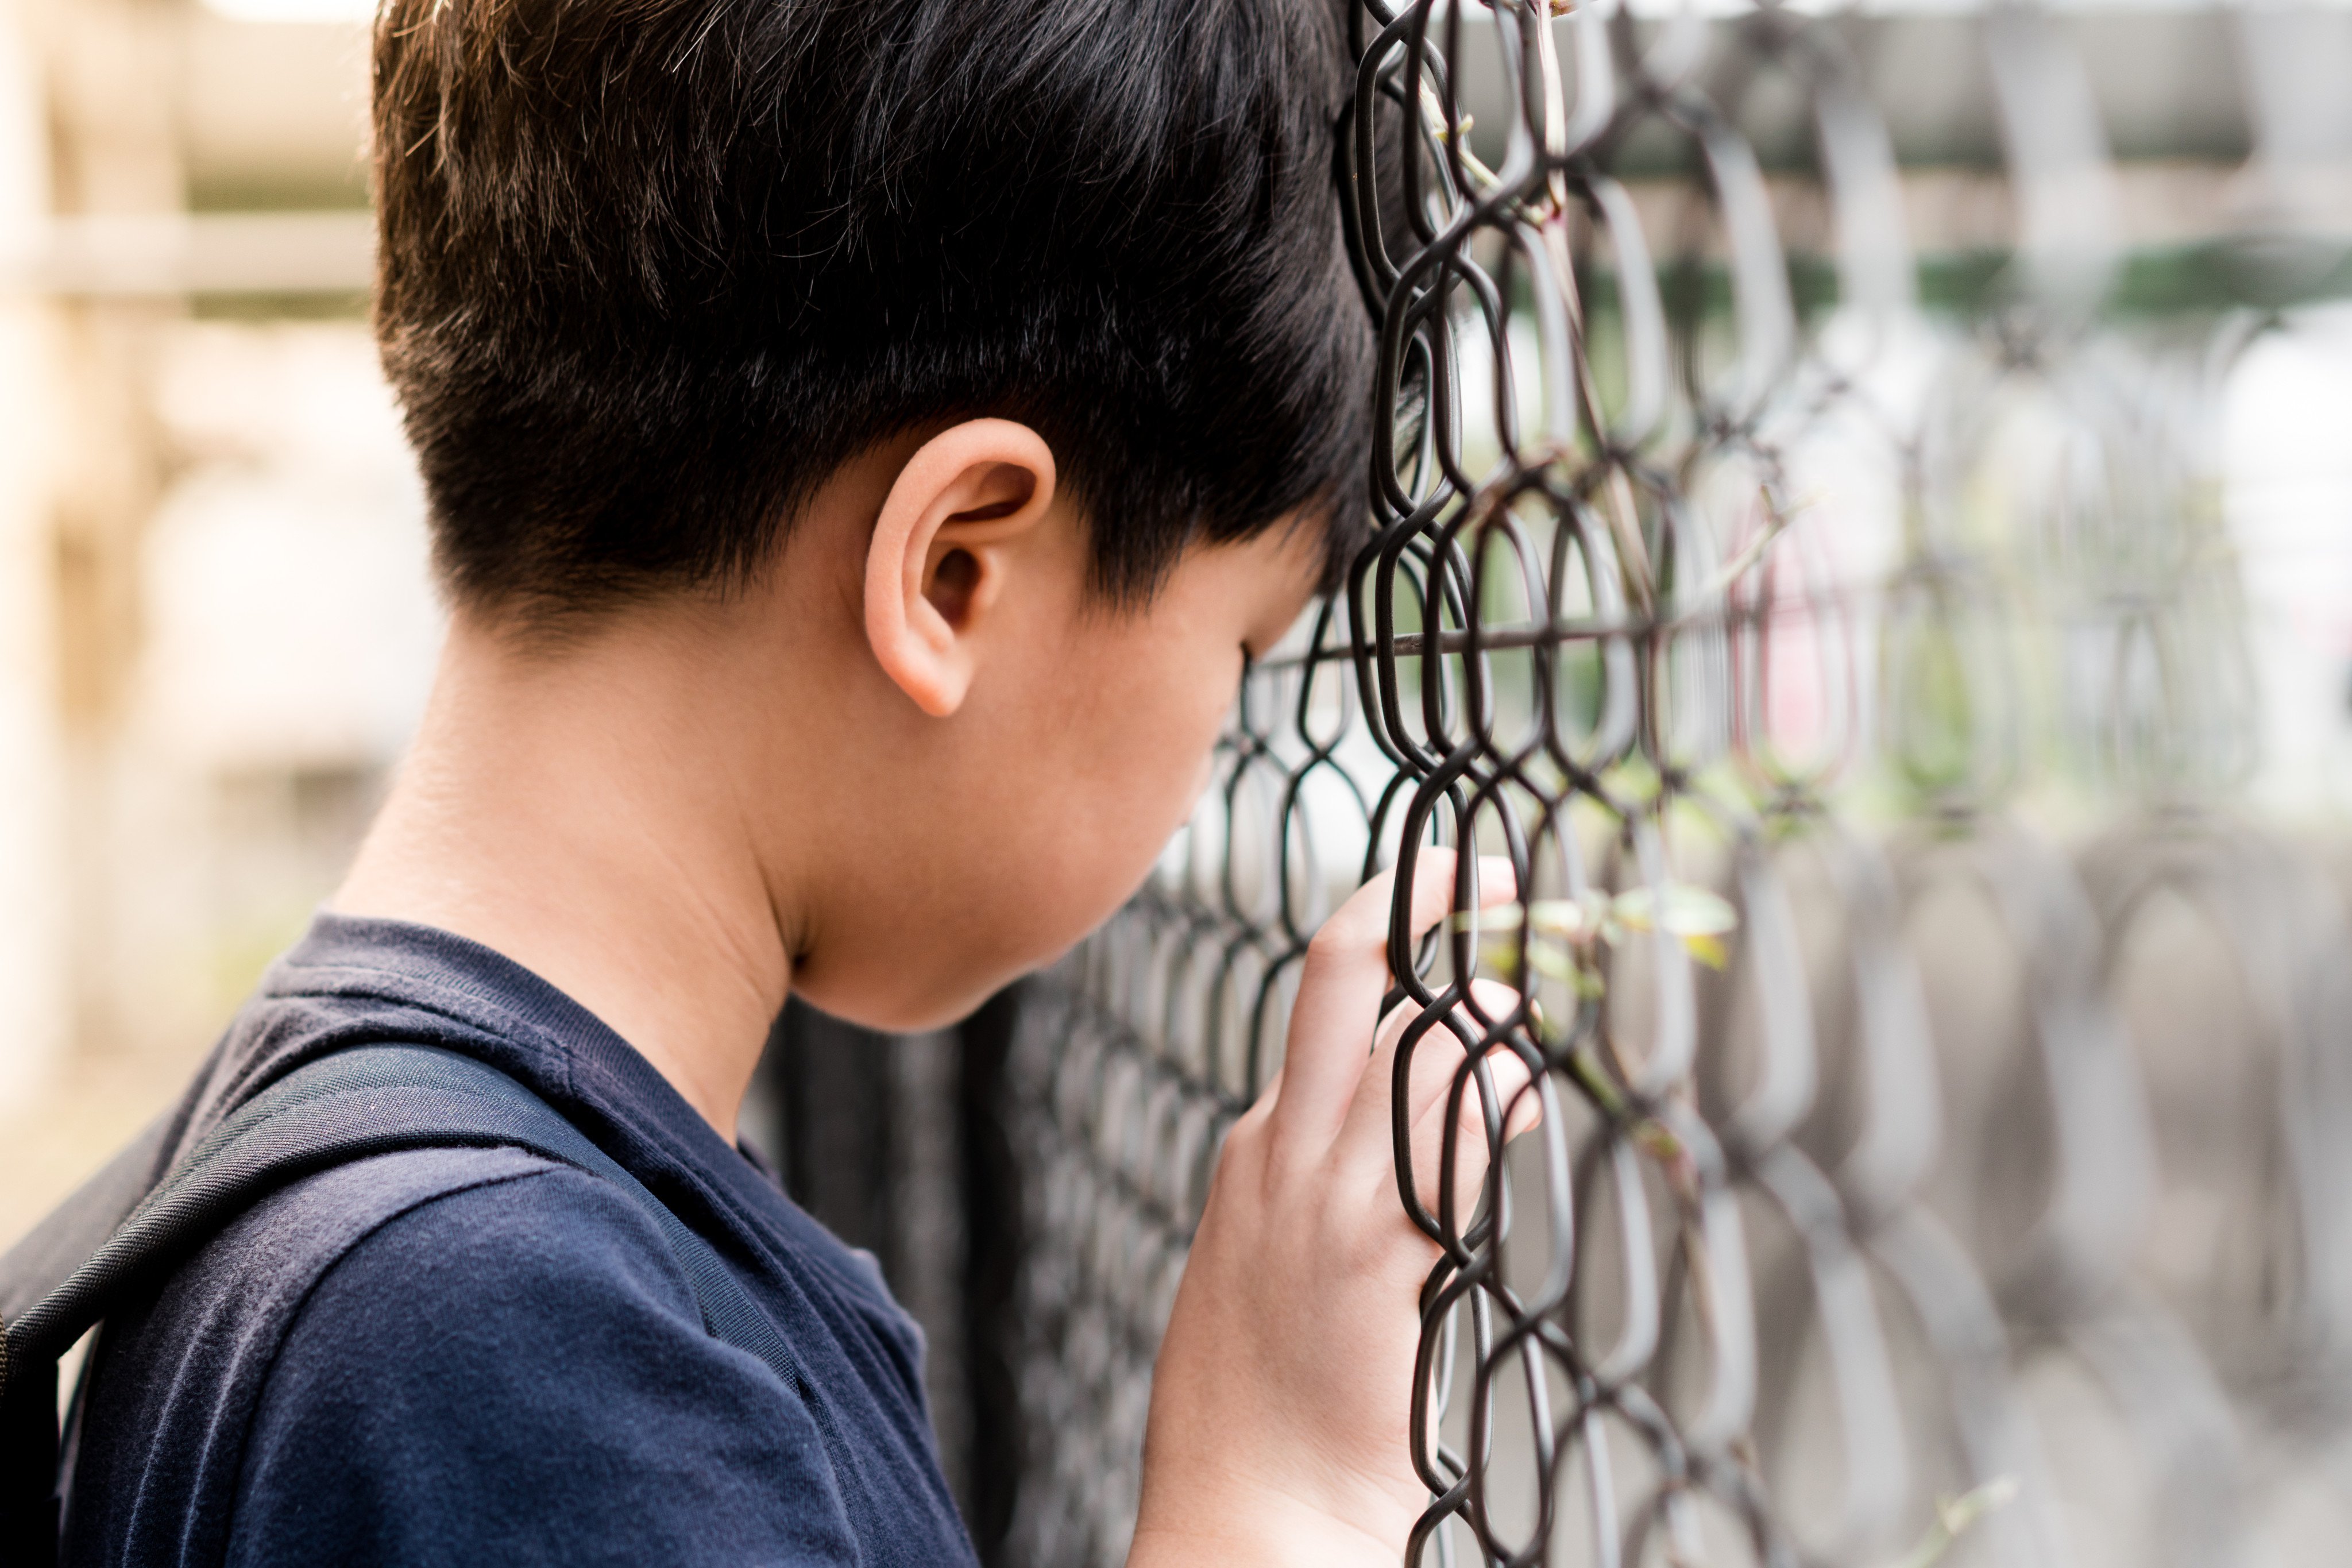 The government’s proposal to require mandatory reporting of child abuse is a good move, but does not go far enough. Photo: Shutterstock